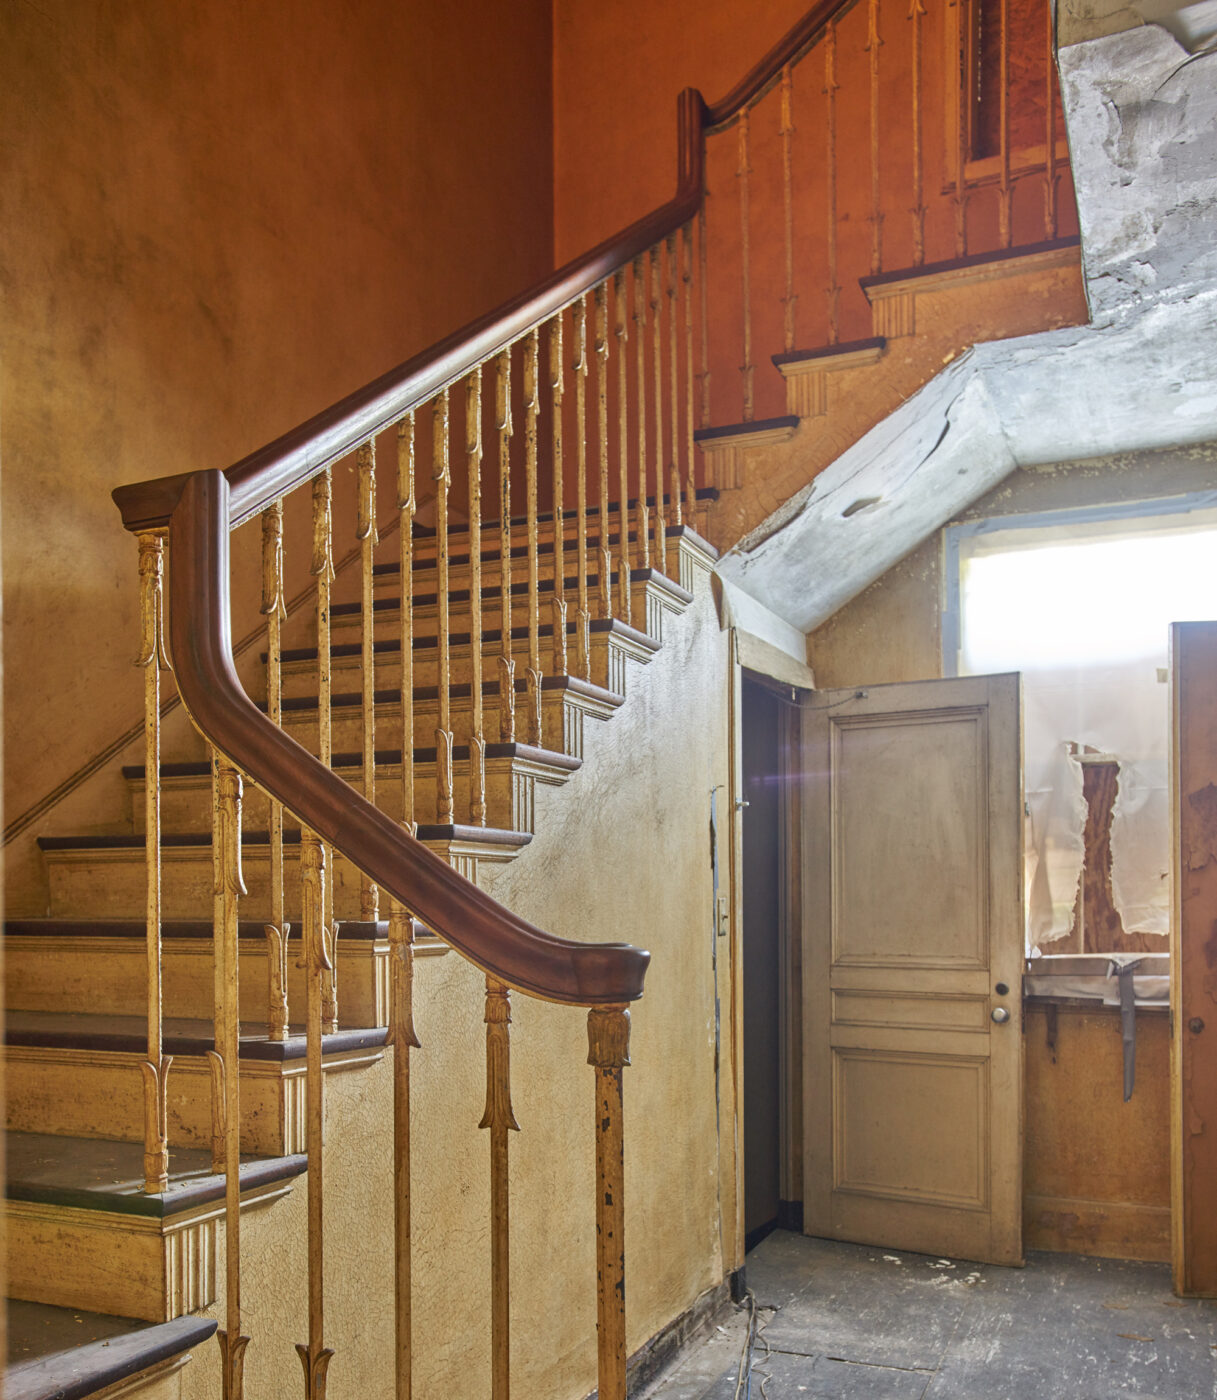 A photo looking up at a curving ornate staircase with a wooden railing.